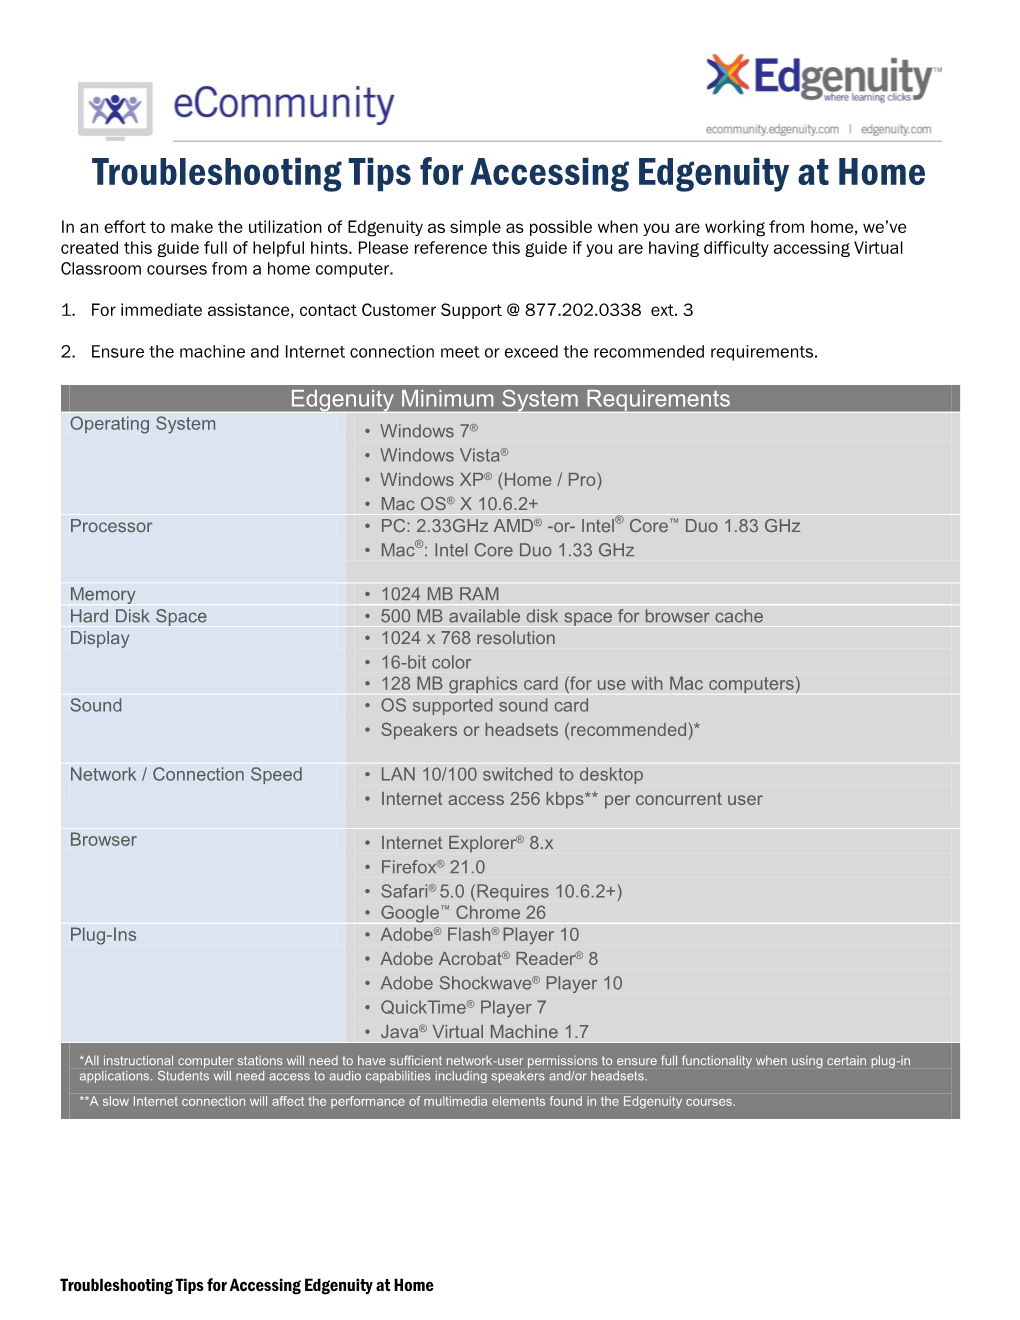 Troubleshooting Tips for Accessing Edgenuity at Home